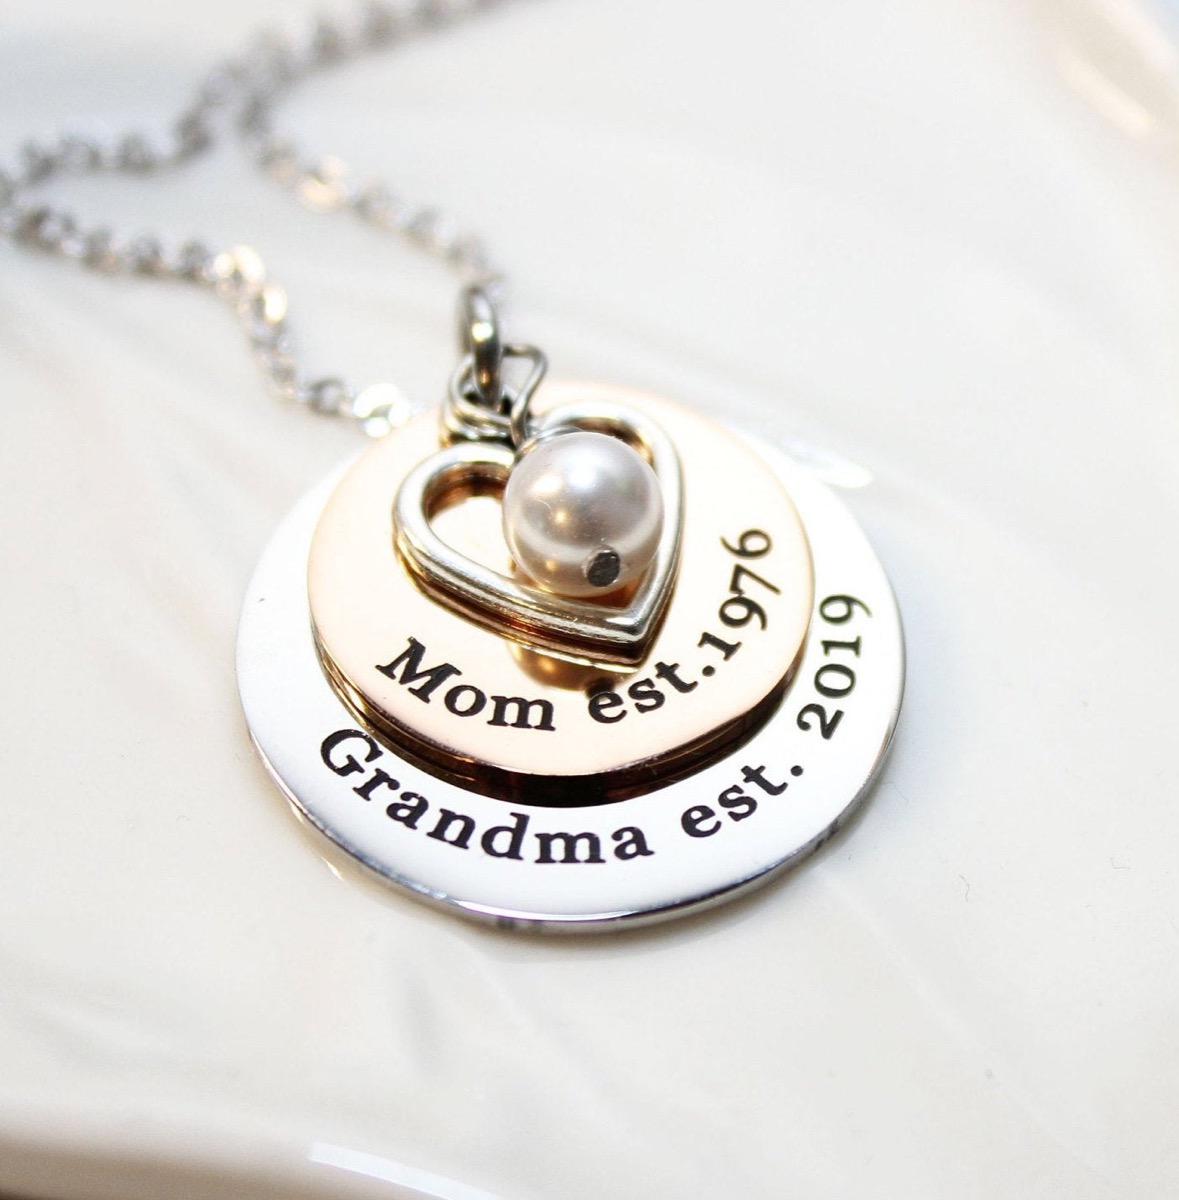 two engraved metal discs, a heart pendant, and a pearl on a silver chain, best gifts for grandparents